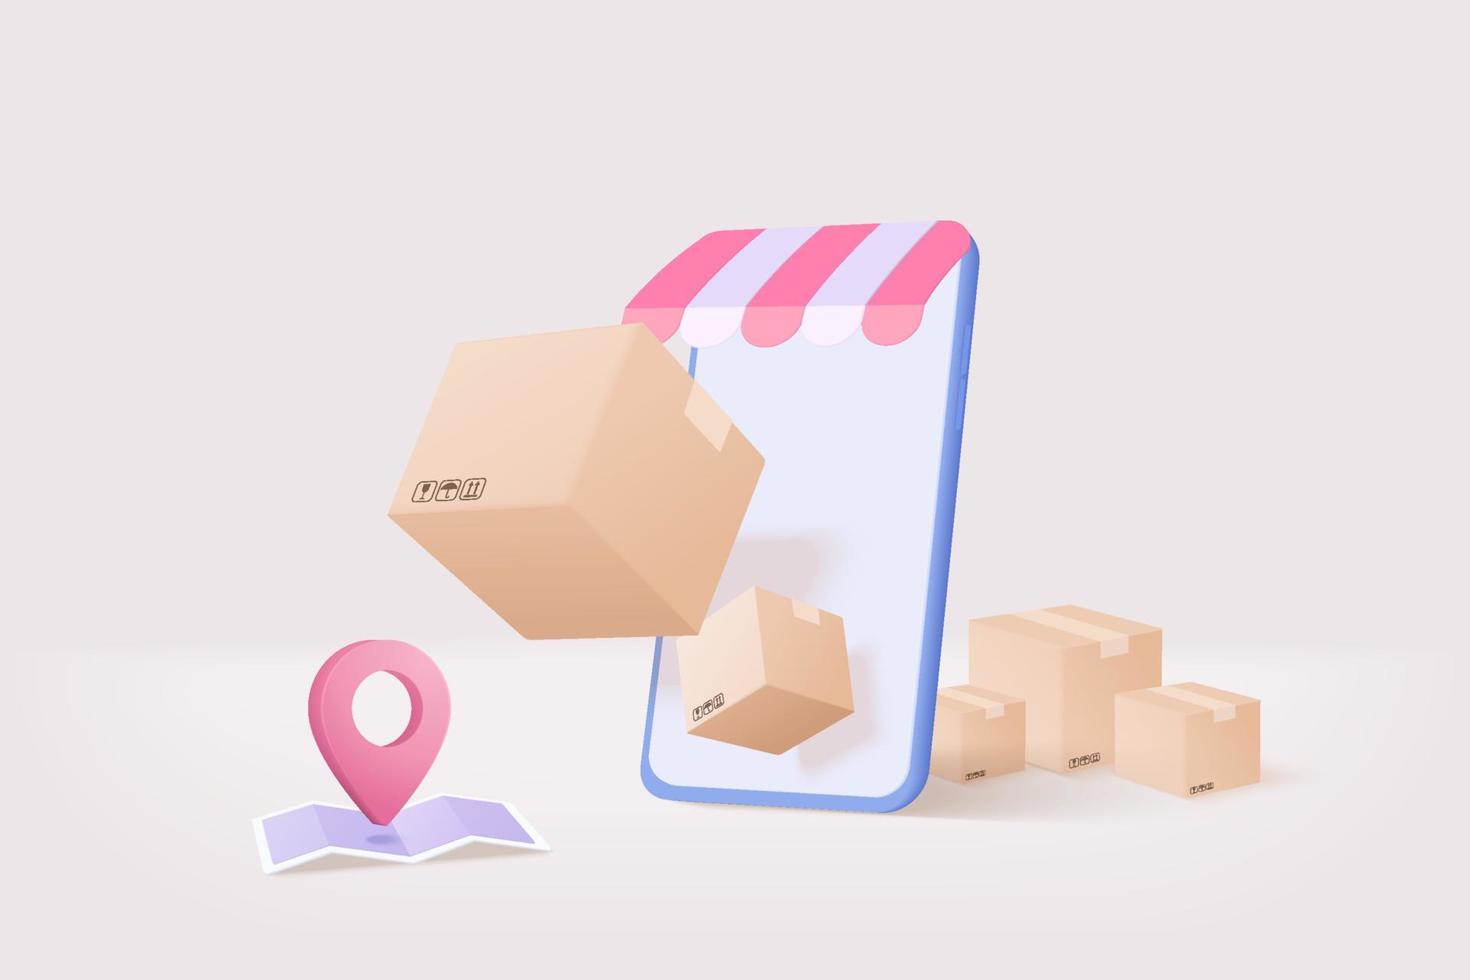 3D online deliver service, delivery tracking smartphone, pin location point marker of map for shipment concept. Product shipping packing out from mobile. Logistic icon 3d vector render illustration